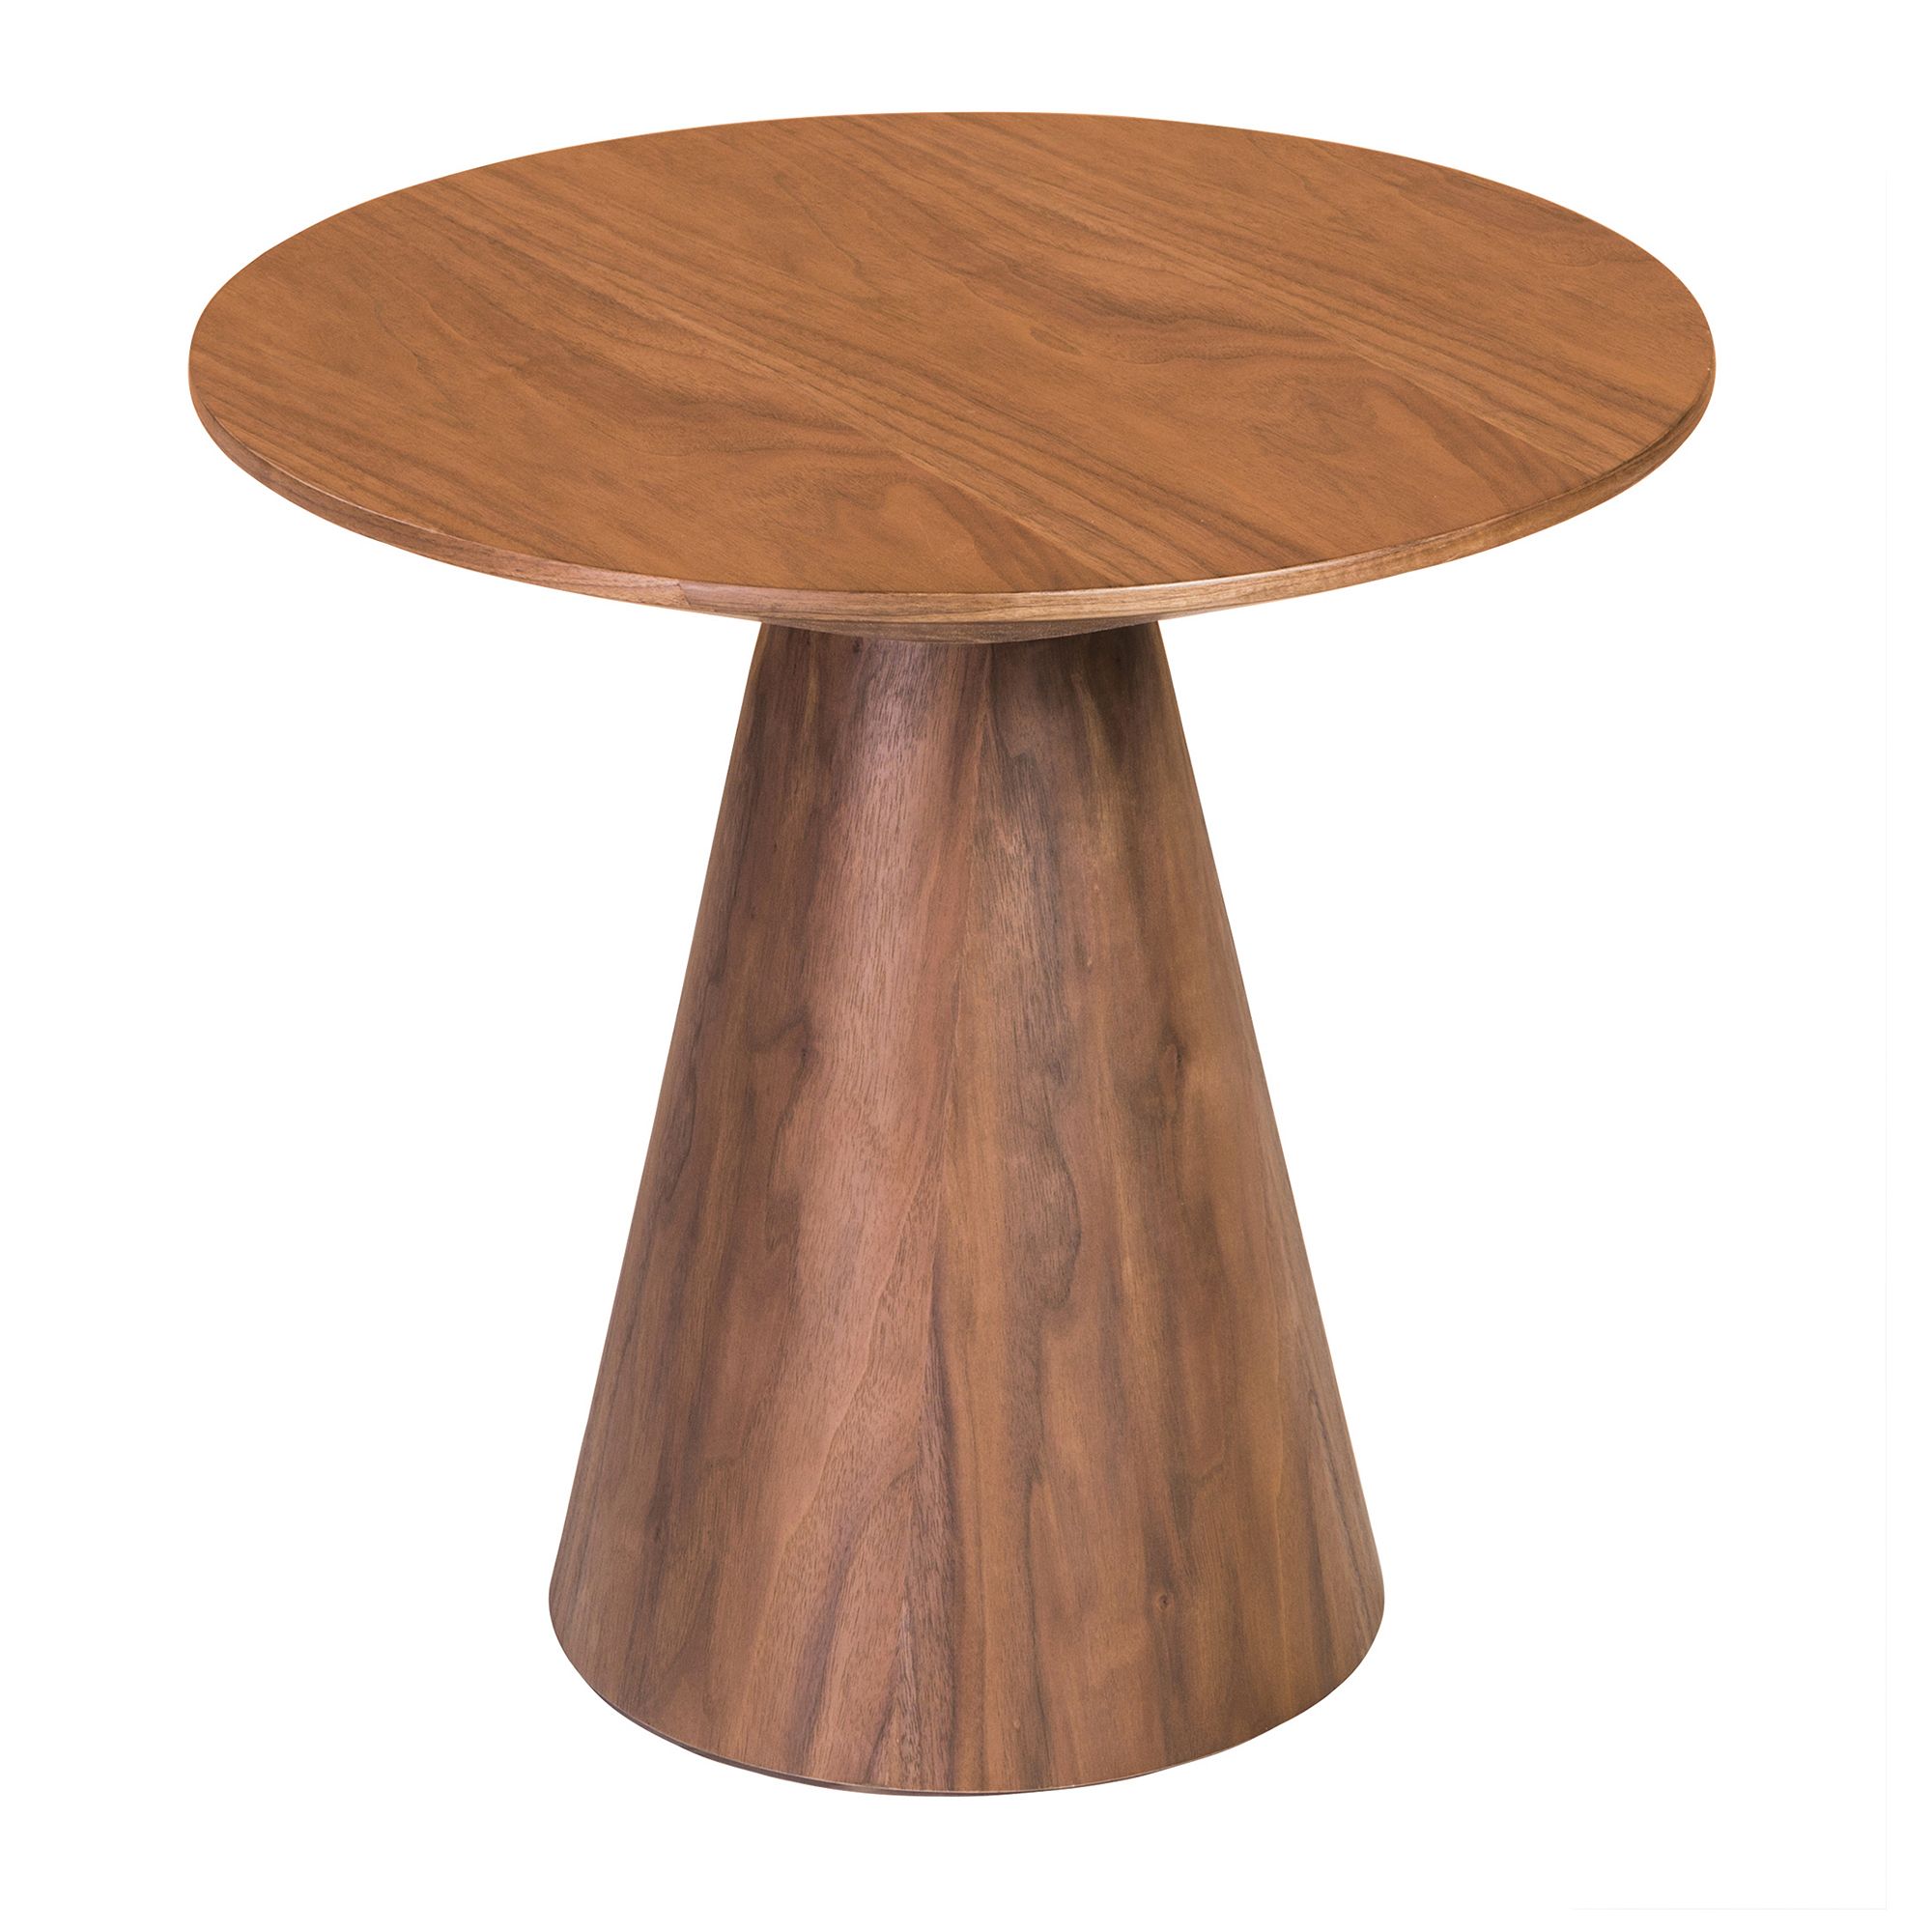 Conical Wood Side Table (24") | West Elm